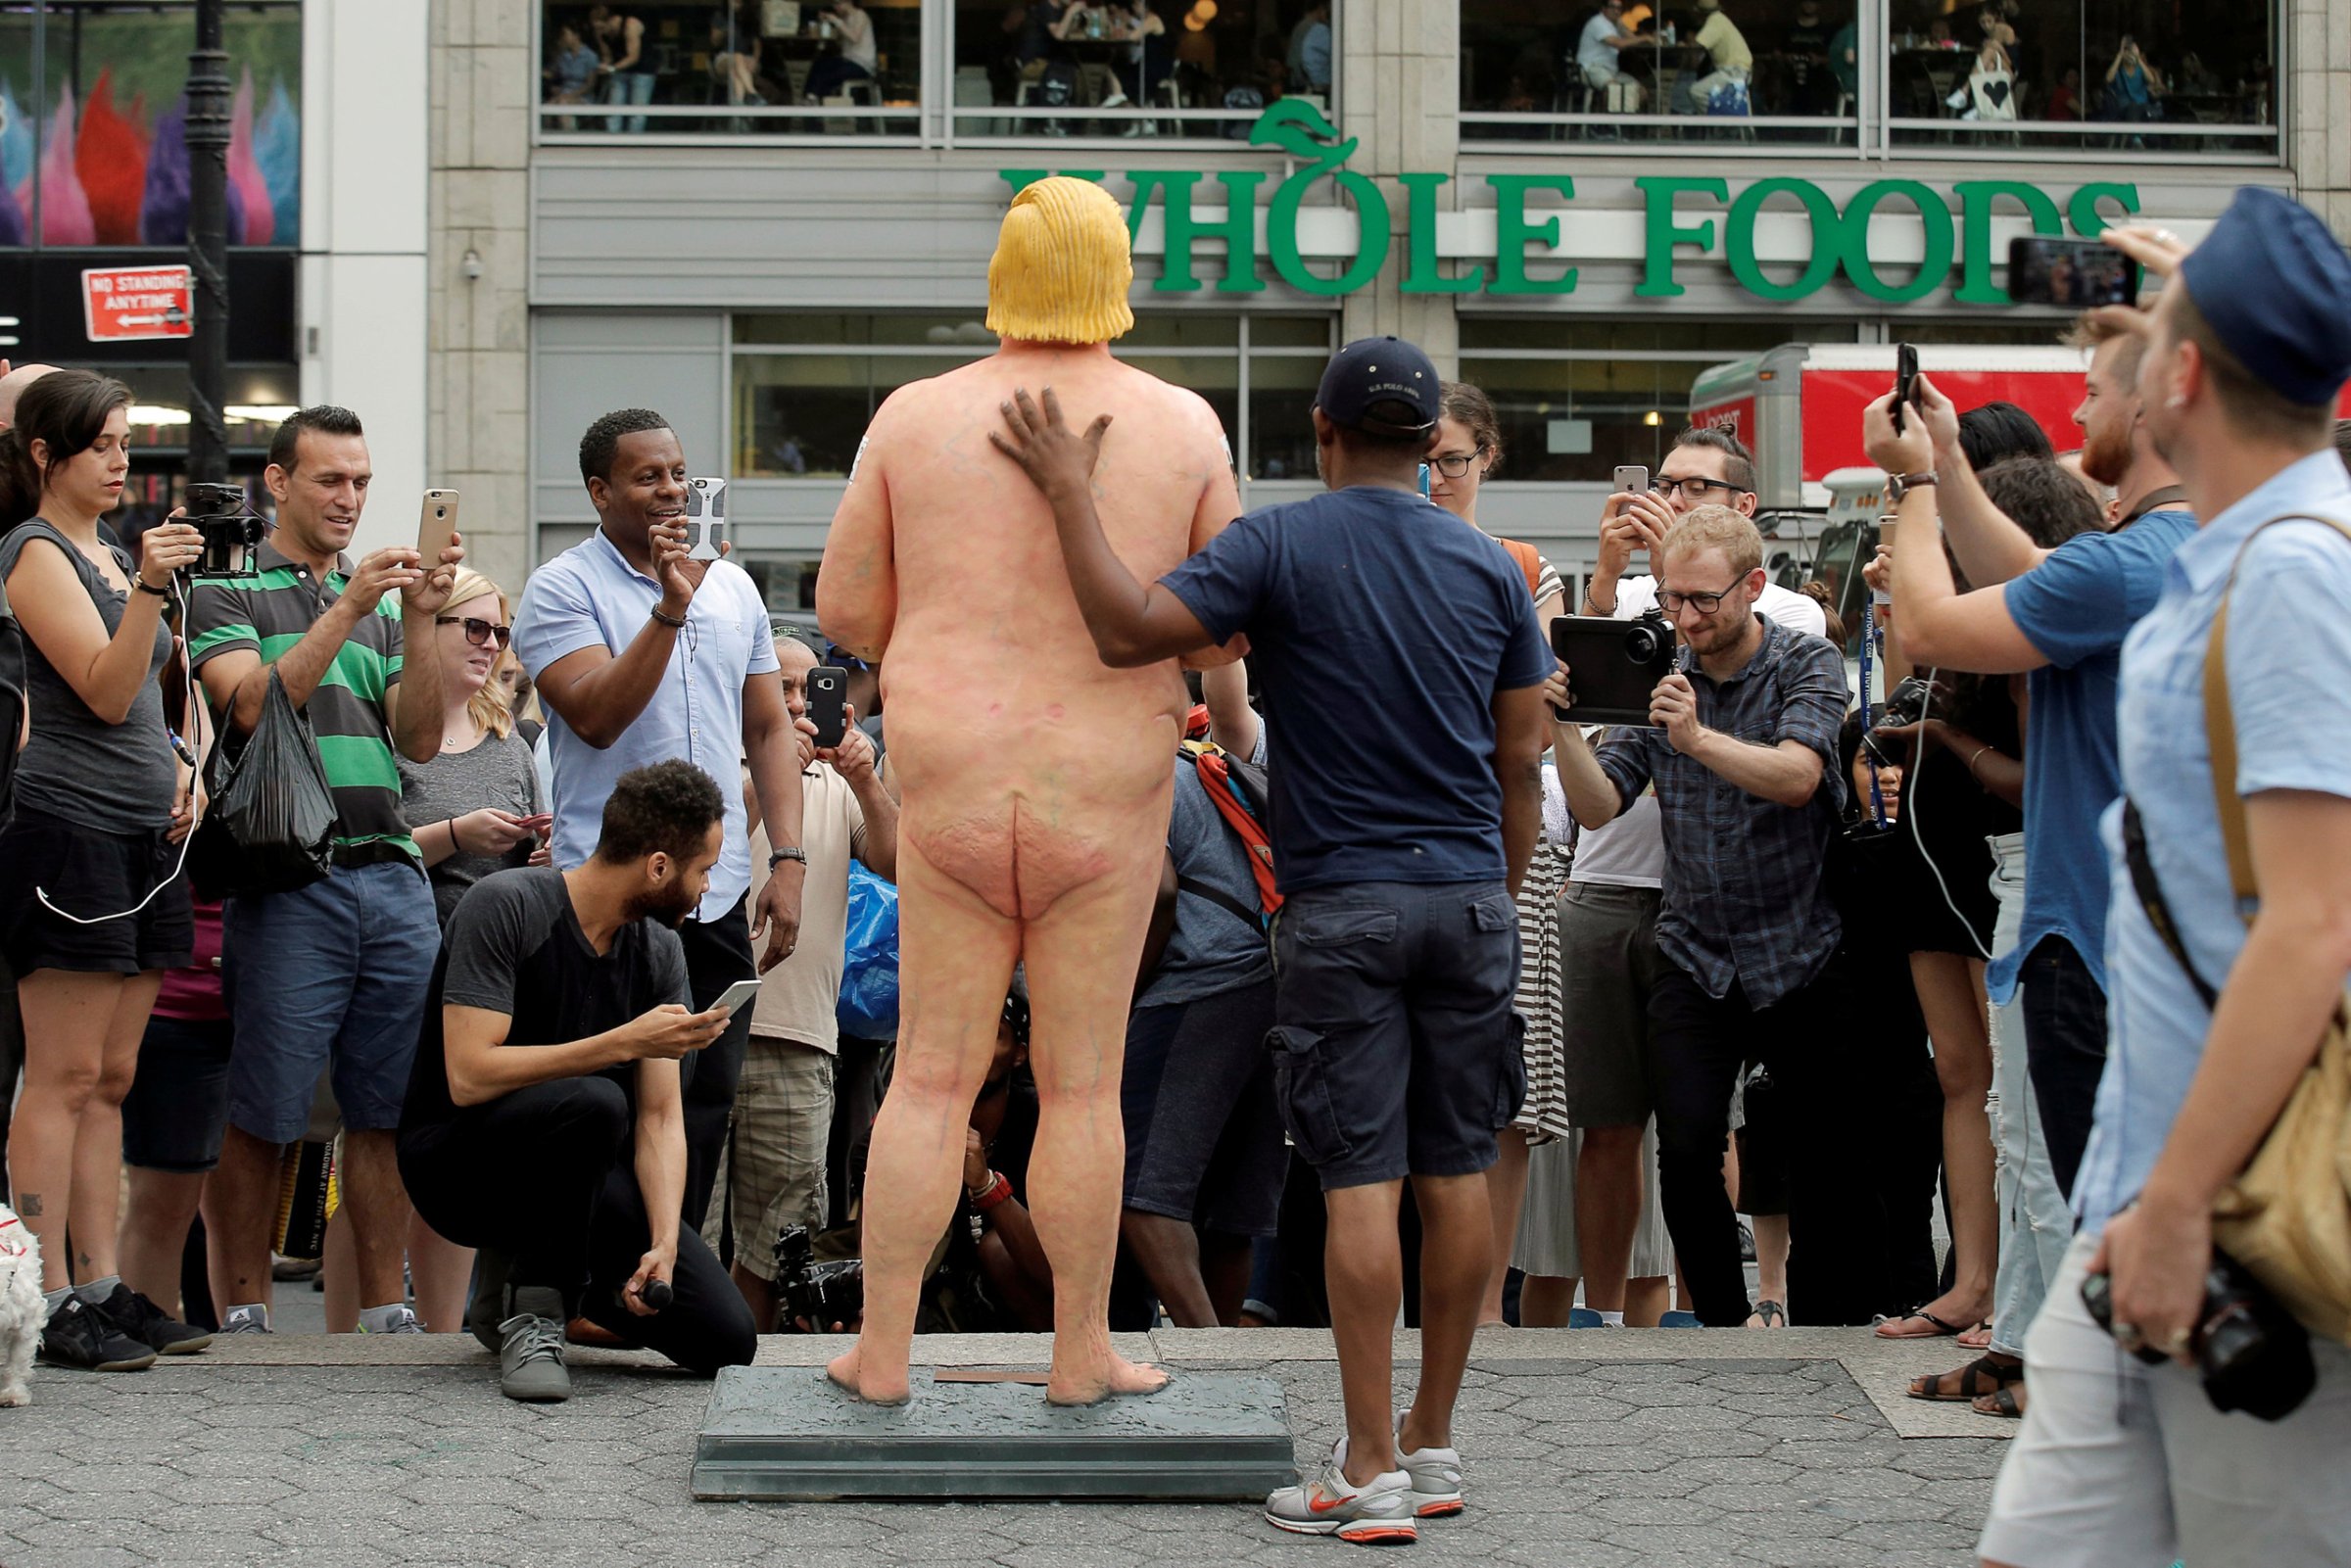 People photograph a naked statue of Republican U.S. presidential nominee Donald Trump that was left in Union Square Park in New York City on Aug. 18, 2016.